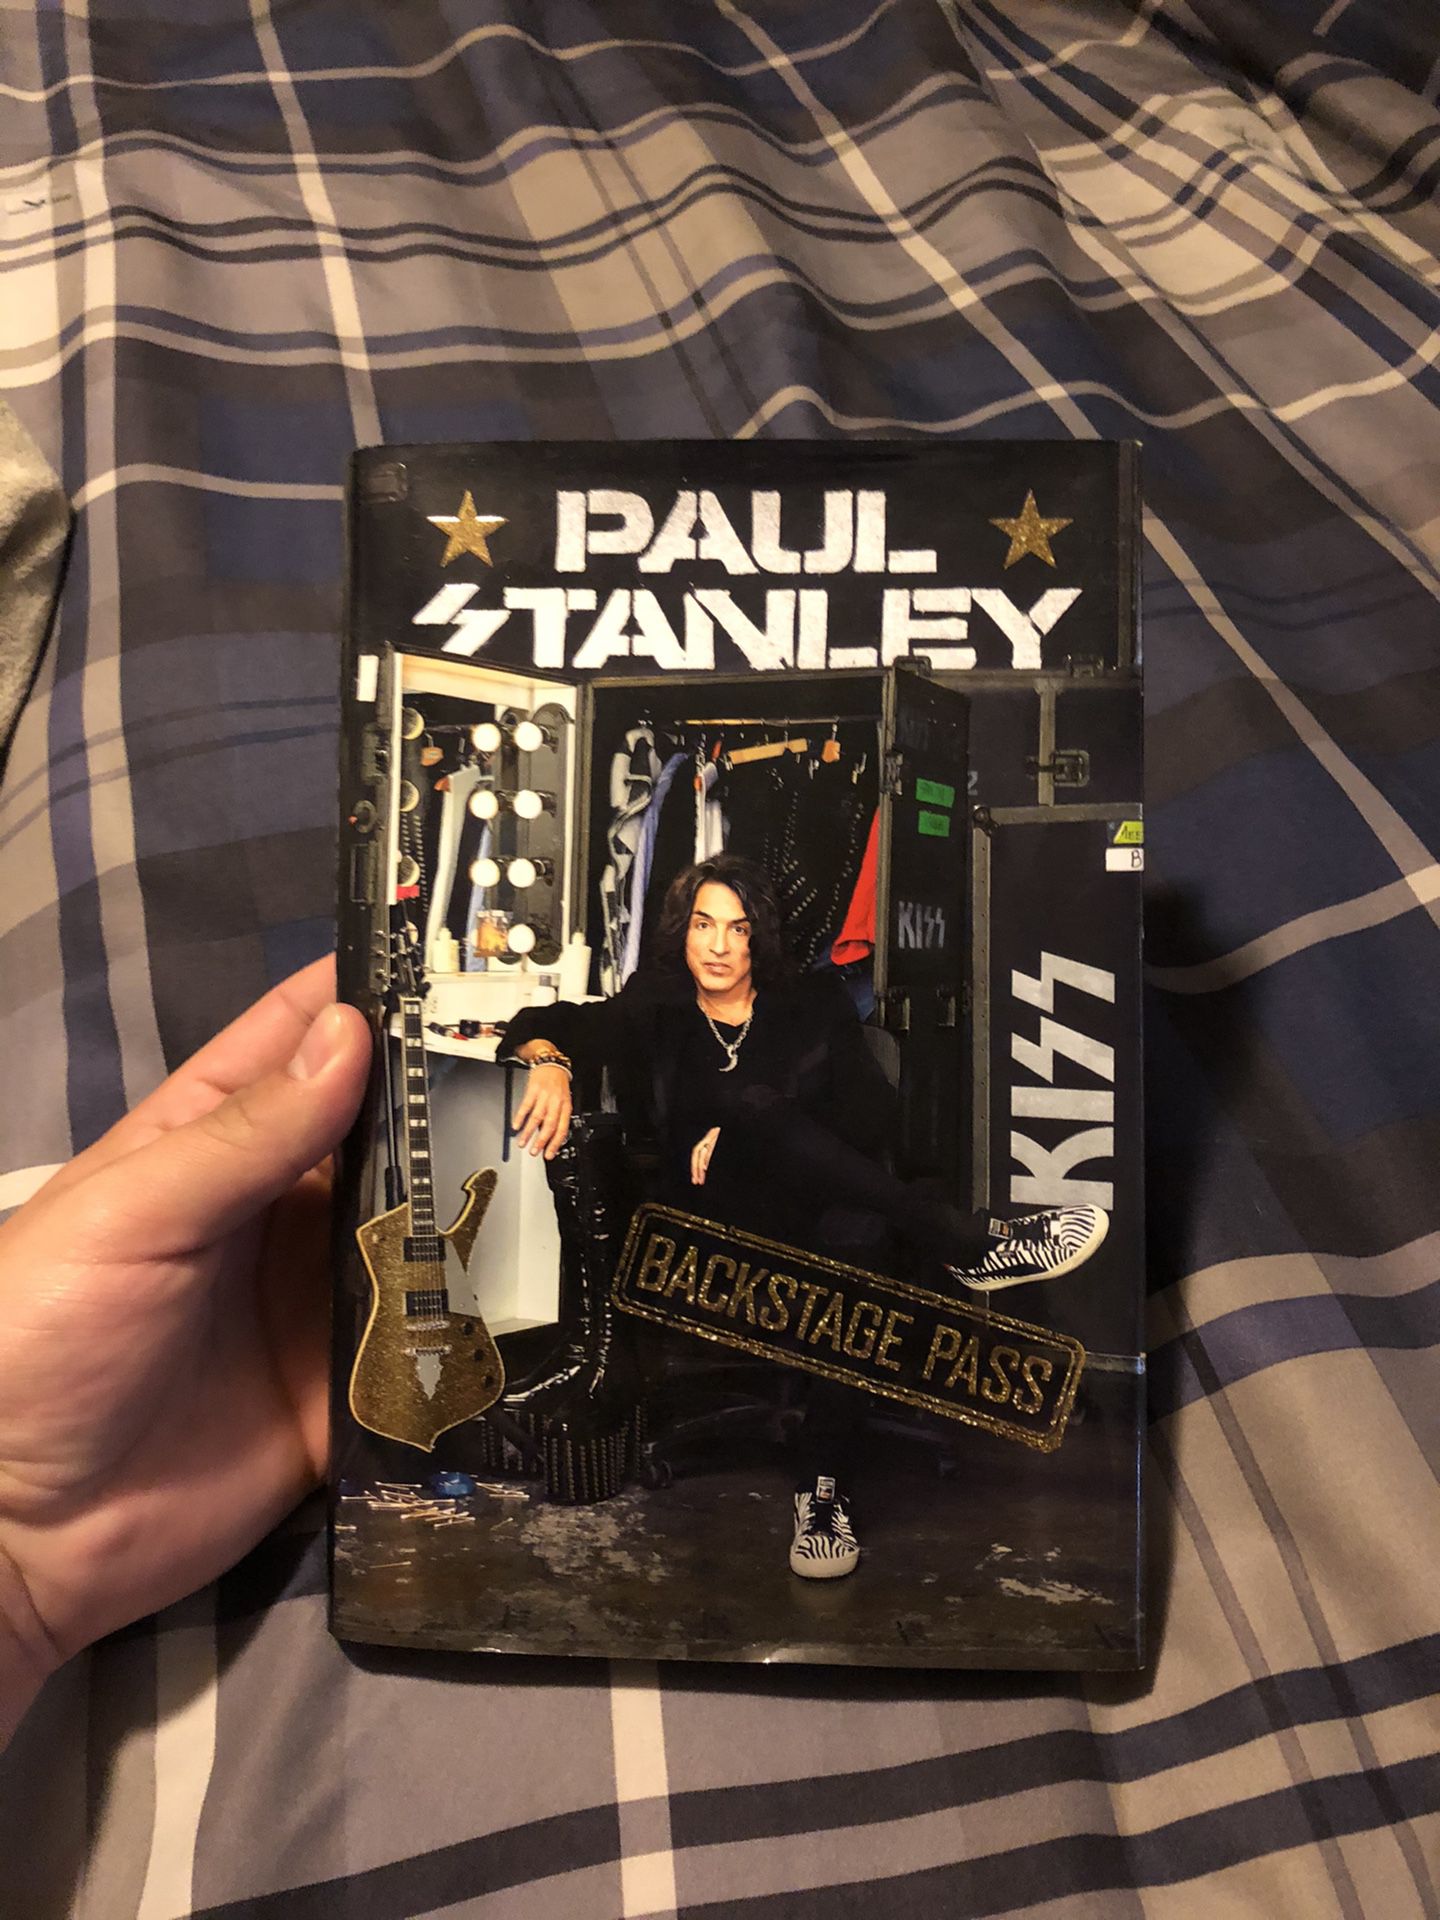 Paul Stanley backstage pass book